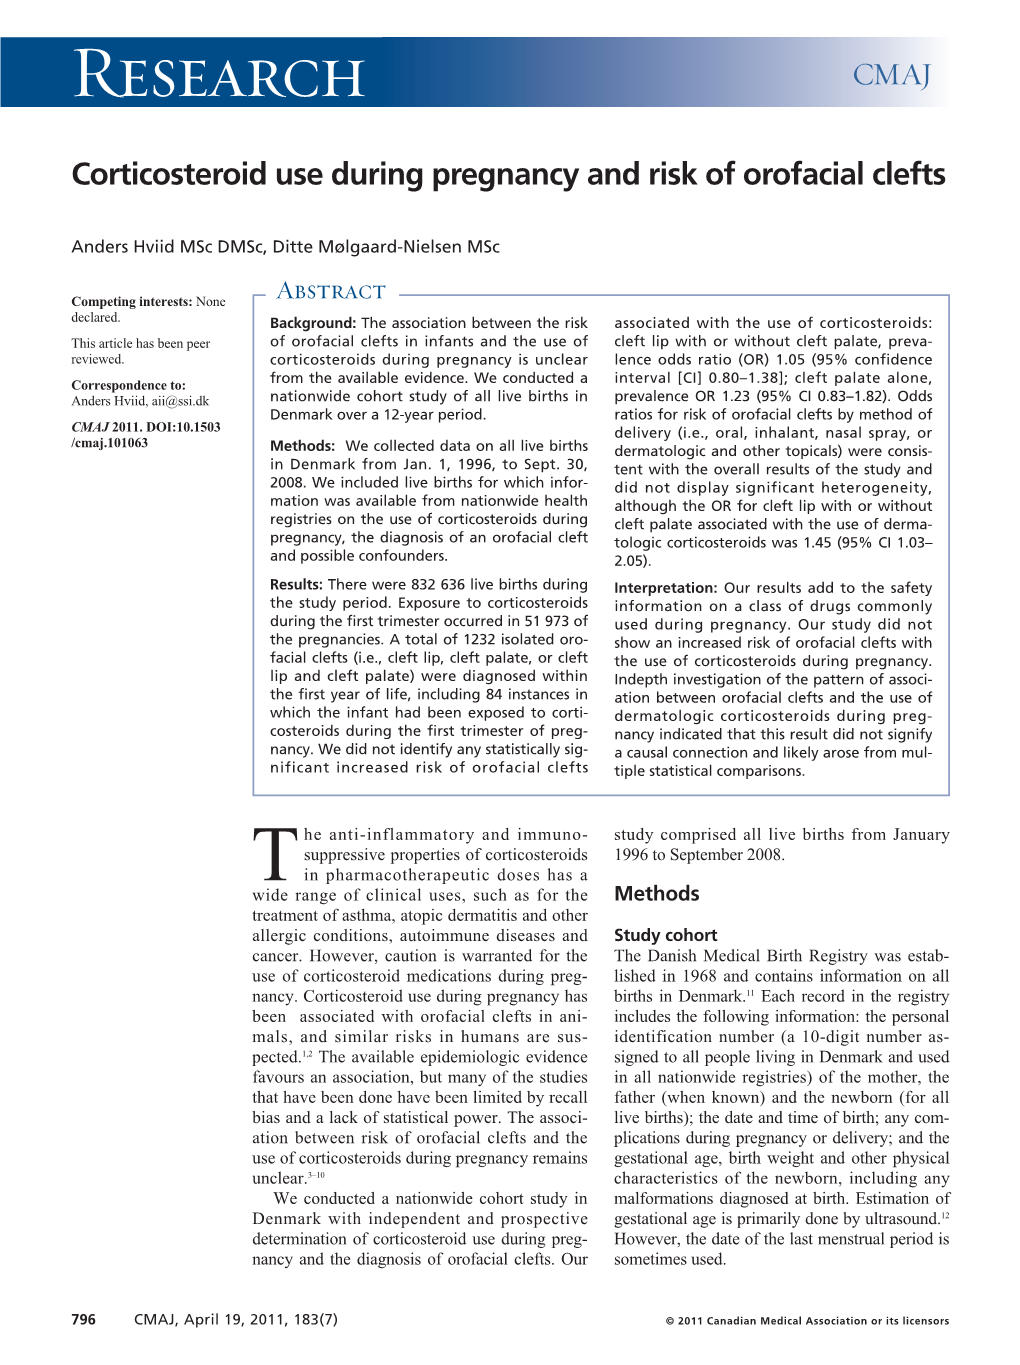 Corticosteroid Use During Pregnancy and Risk of Orofacial Clefts